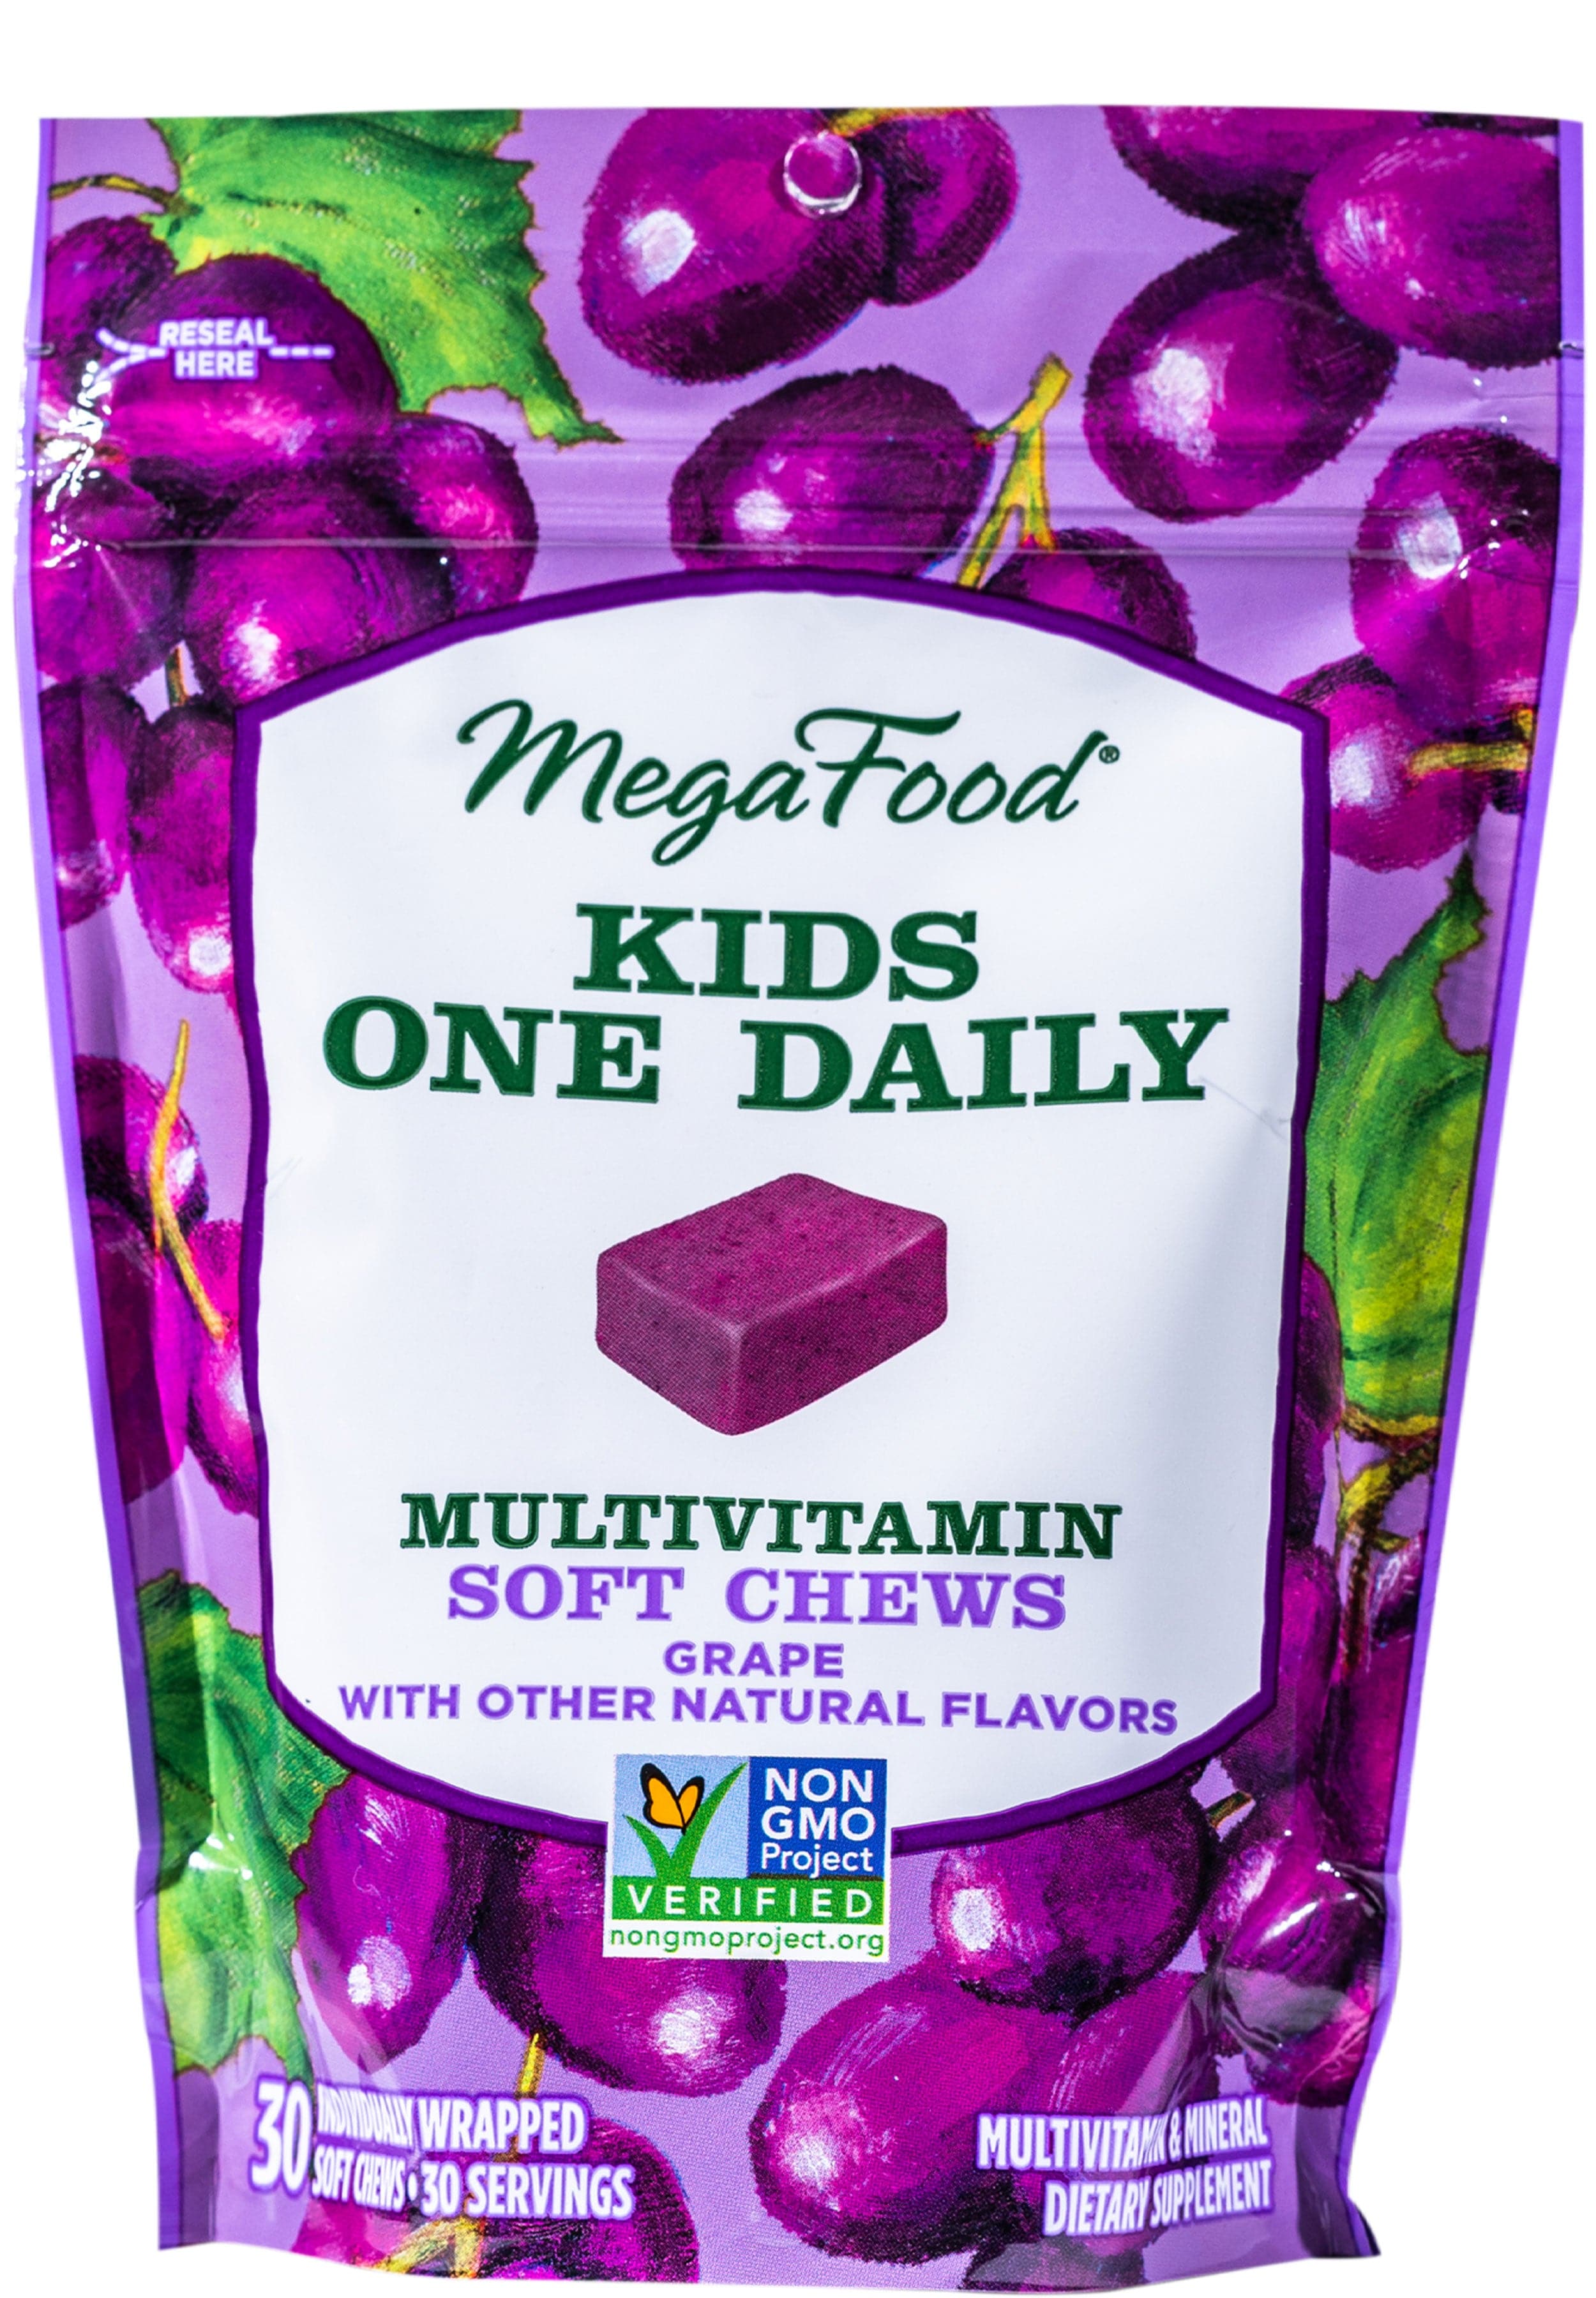 MegaFood Kids One Daily Multivitamin Soft Chews